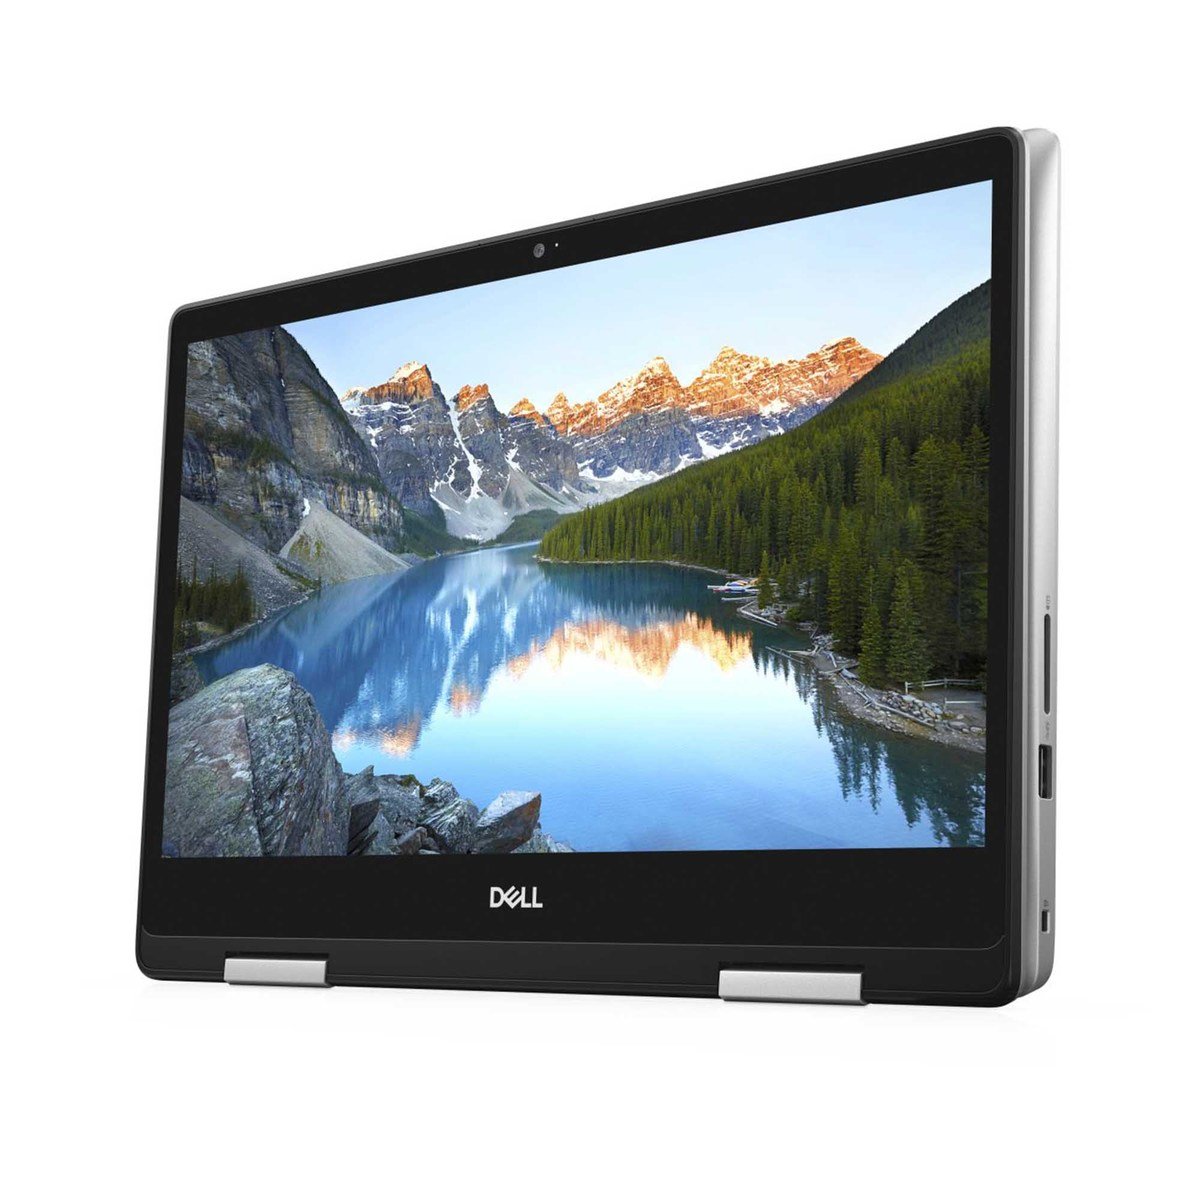 Dell Inspiron 15 5491-INS-1382 2in1 Notebook, Intel Core i3-10110U, 4GB RAM, 256GB SSD, 14 Inches Touch Display, Windows 10 Home, Silver